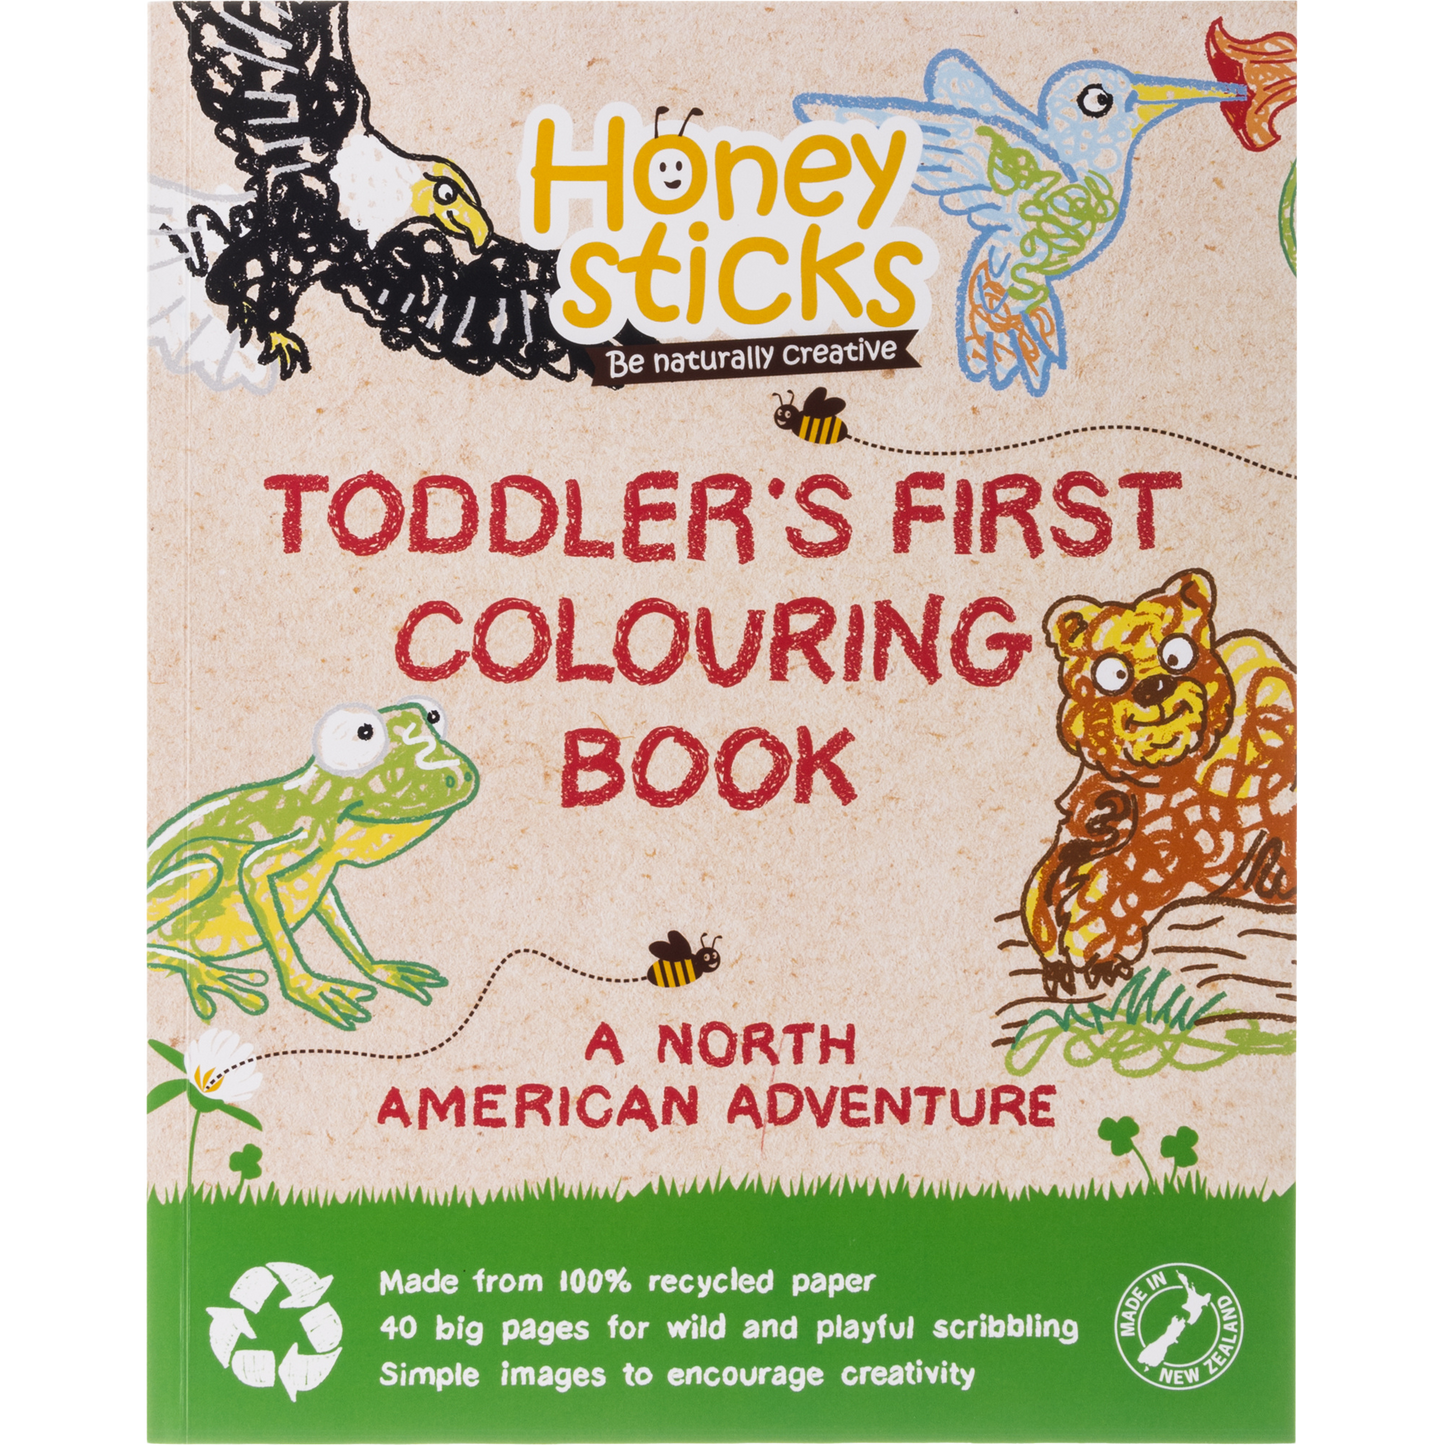 Toddlers First Colouring Book - A North American Adventure by Honeysticks USA